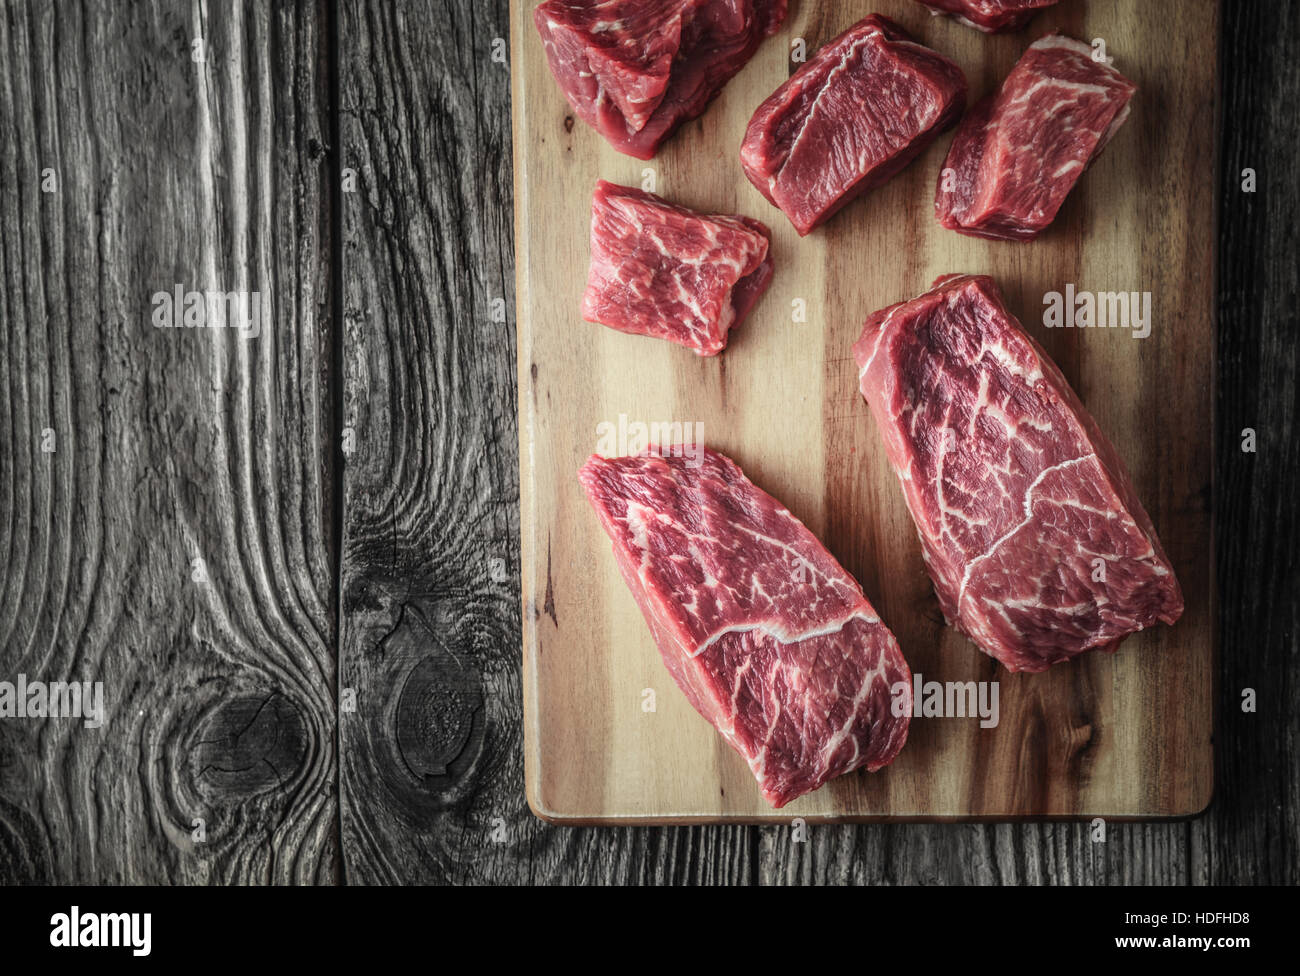 Raw angus beef slices on the wooden board Stock Photo